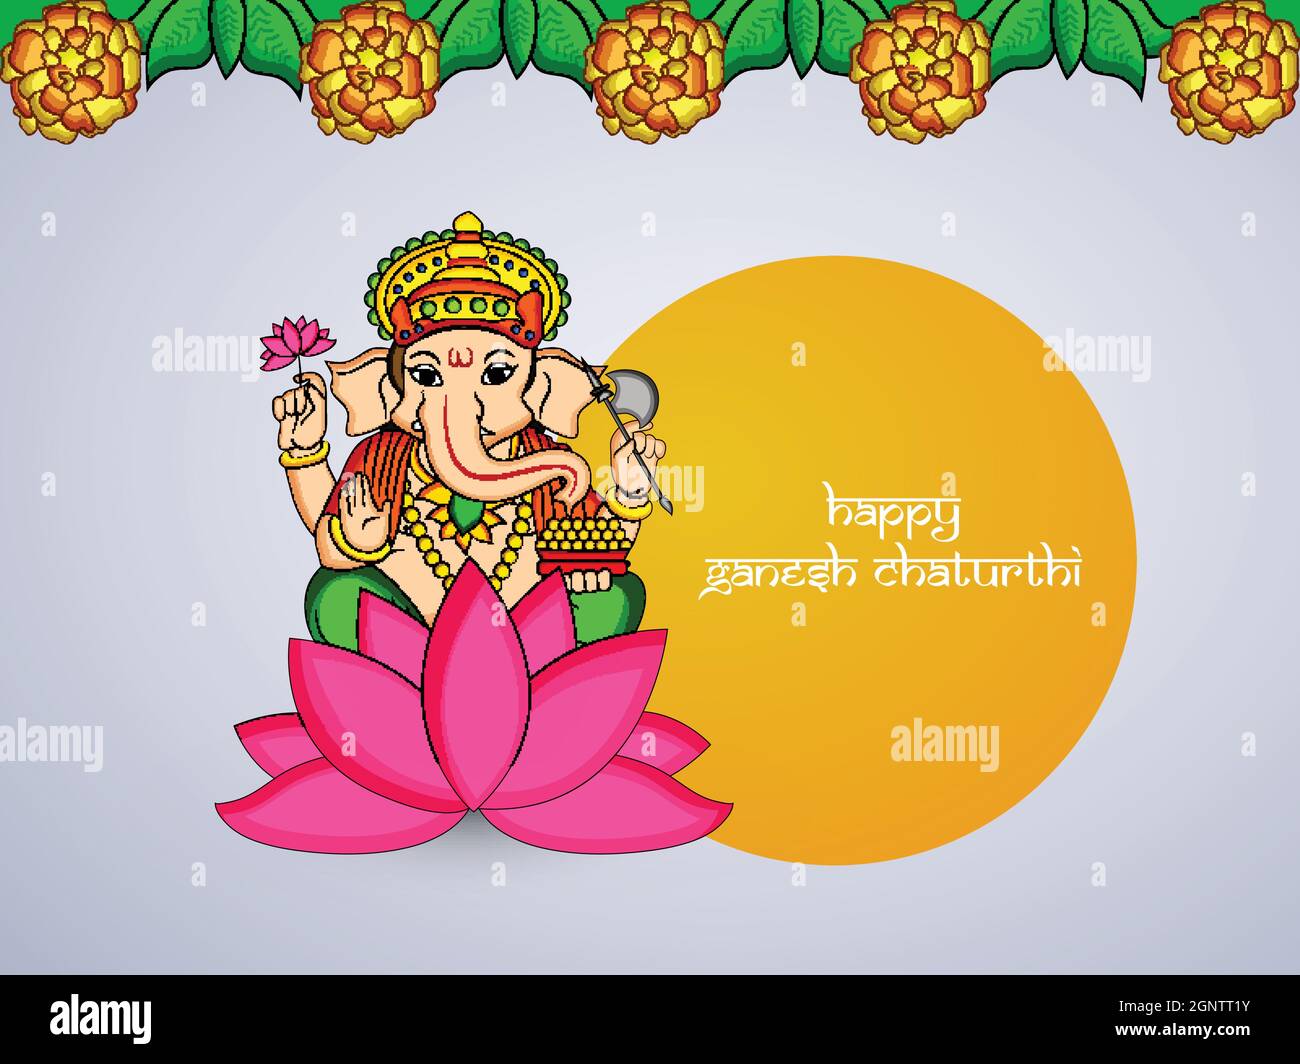 Shiv parvati Stock Vector Images - Alamy